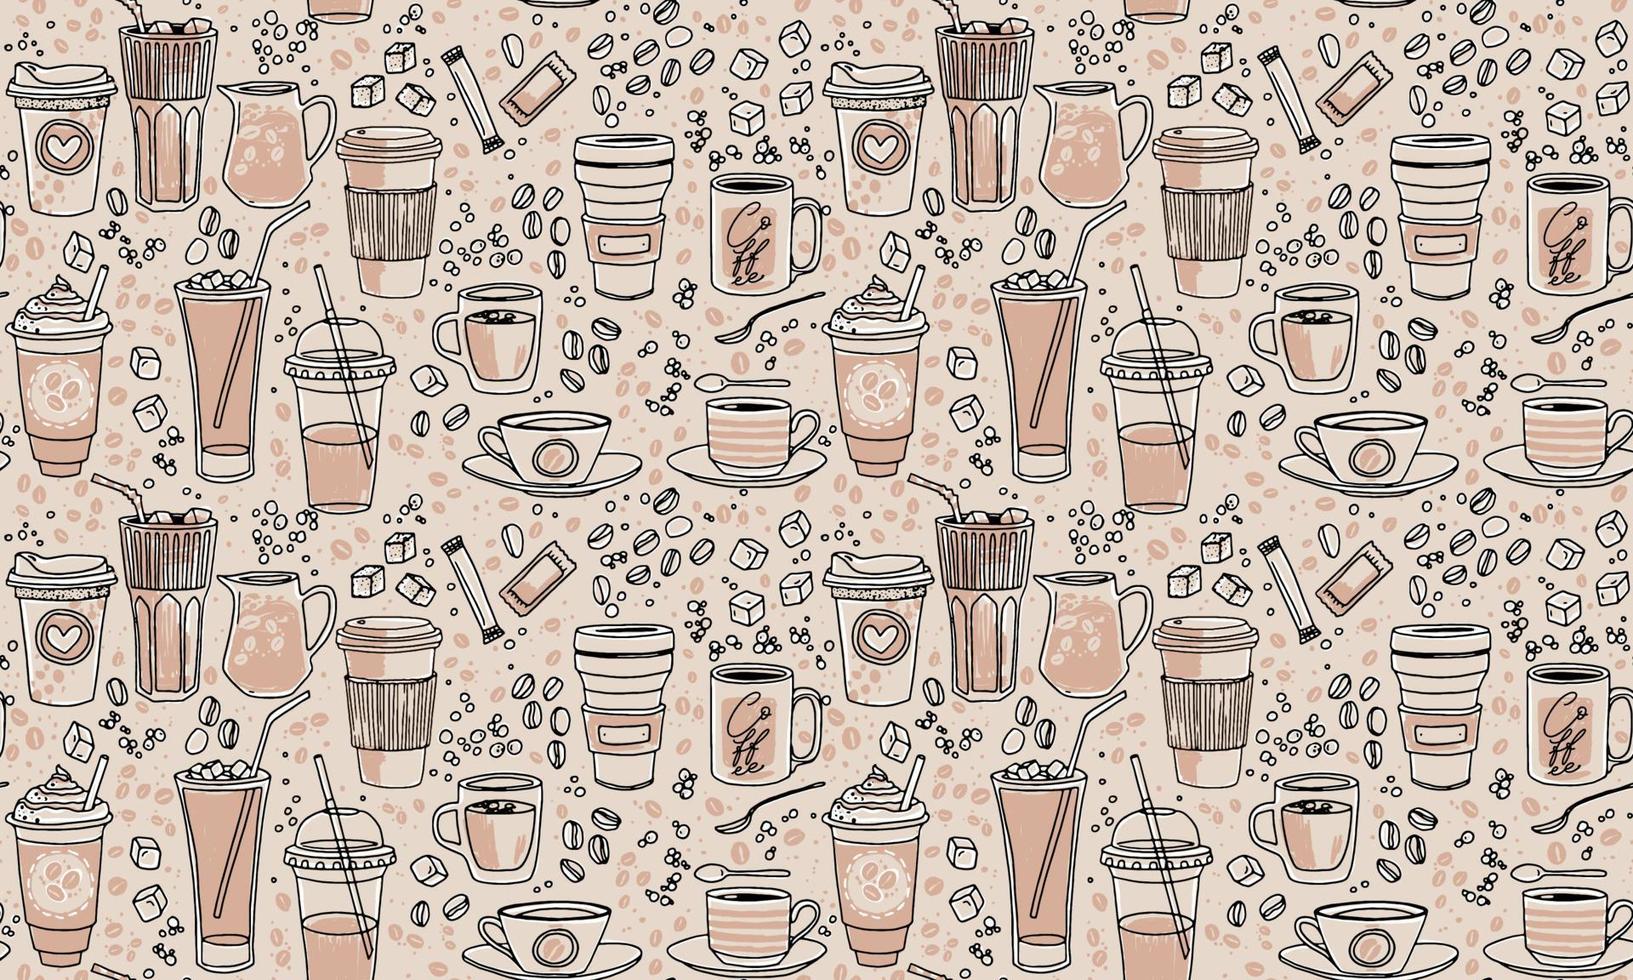 Vector hand drawn seamless pattern. Various cups sketch style drawn background with sugar, spoons, bubbles and coffee beans. Hand drawn linear graphic backdrop.